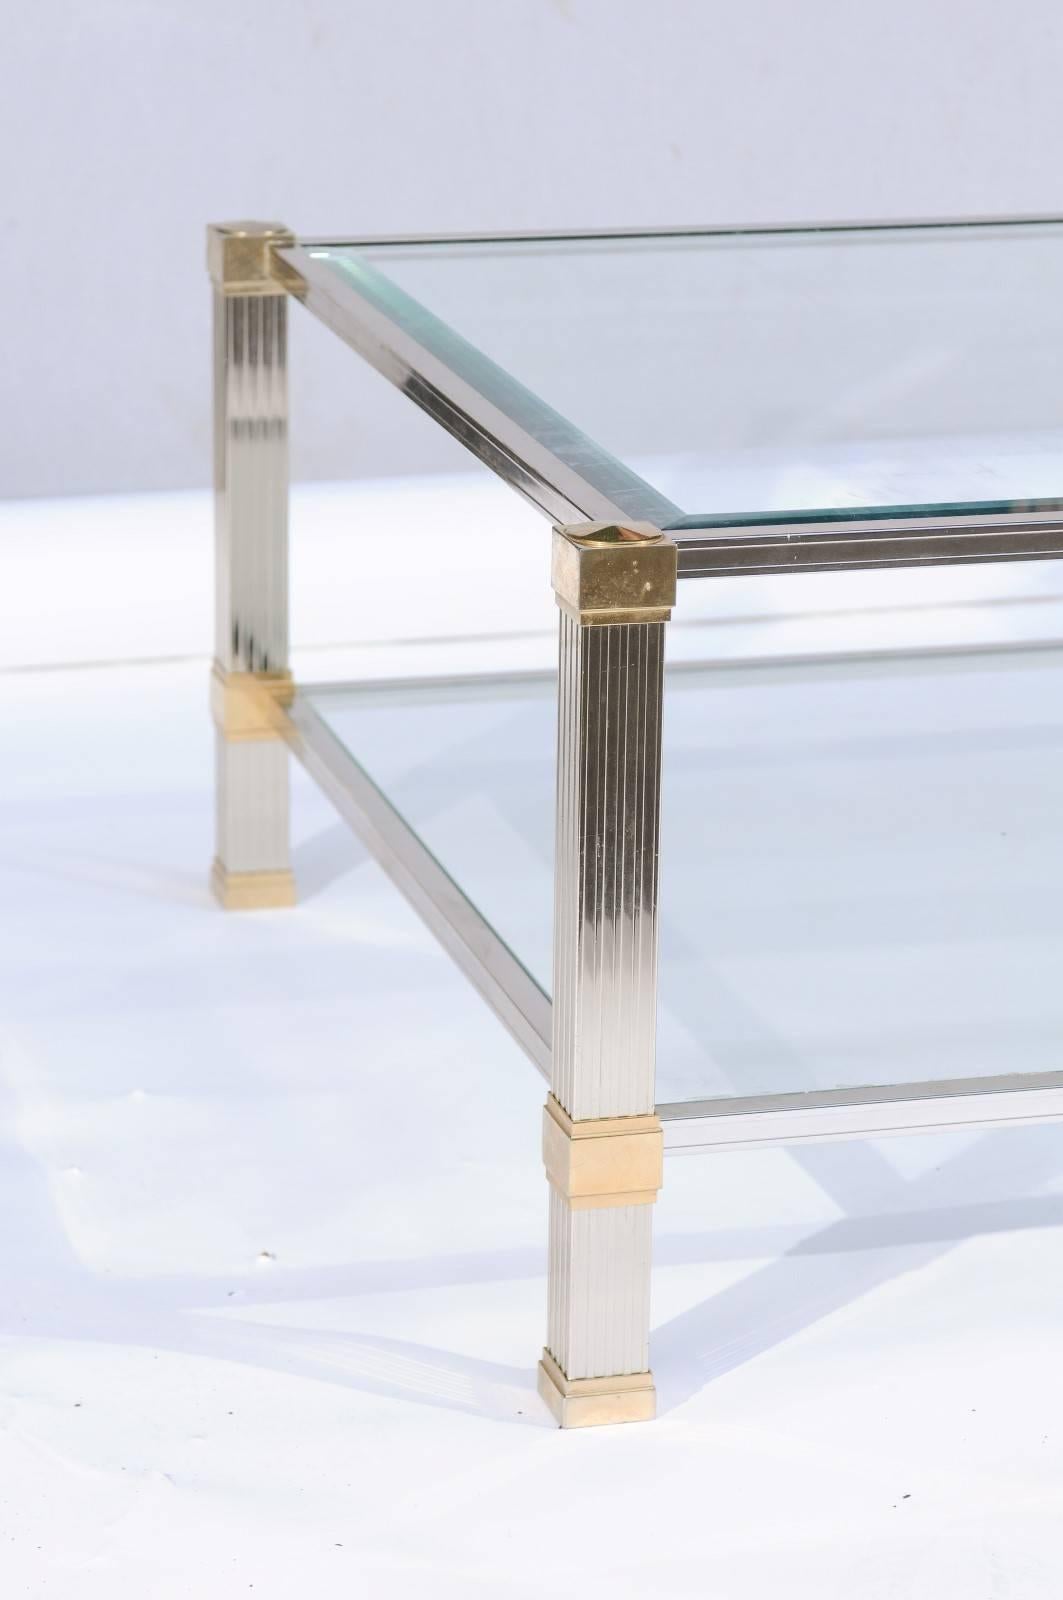 A vintage French gold and chrome coffee table from the mid-20th century with glass shelves, signed by Pierre Vandel. We’re huge fans of anything Pierre Vandel, so when we stumbled upon this handsome gold and chrome coffee table on a French